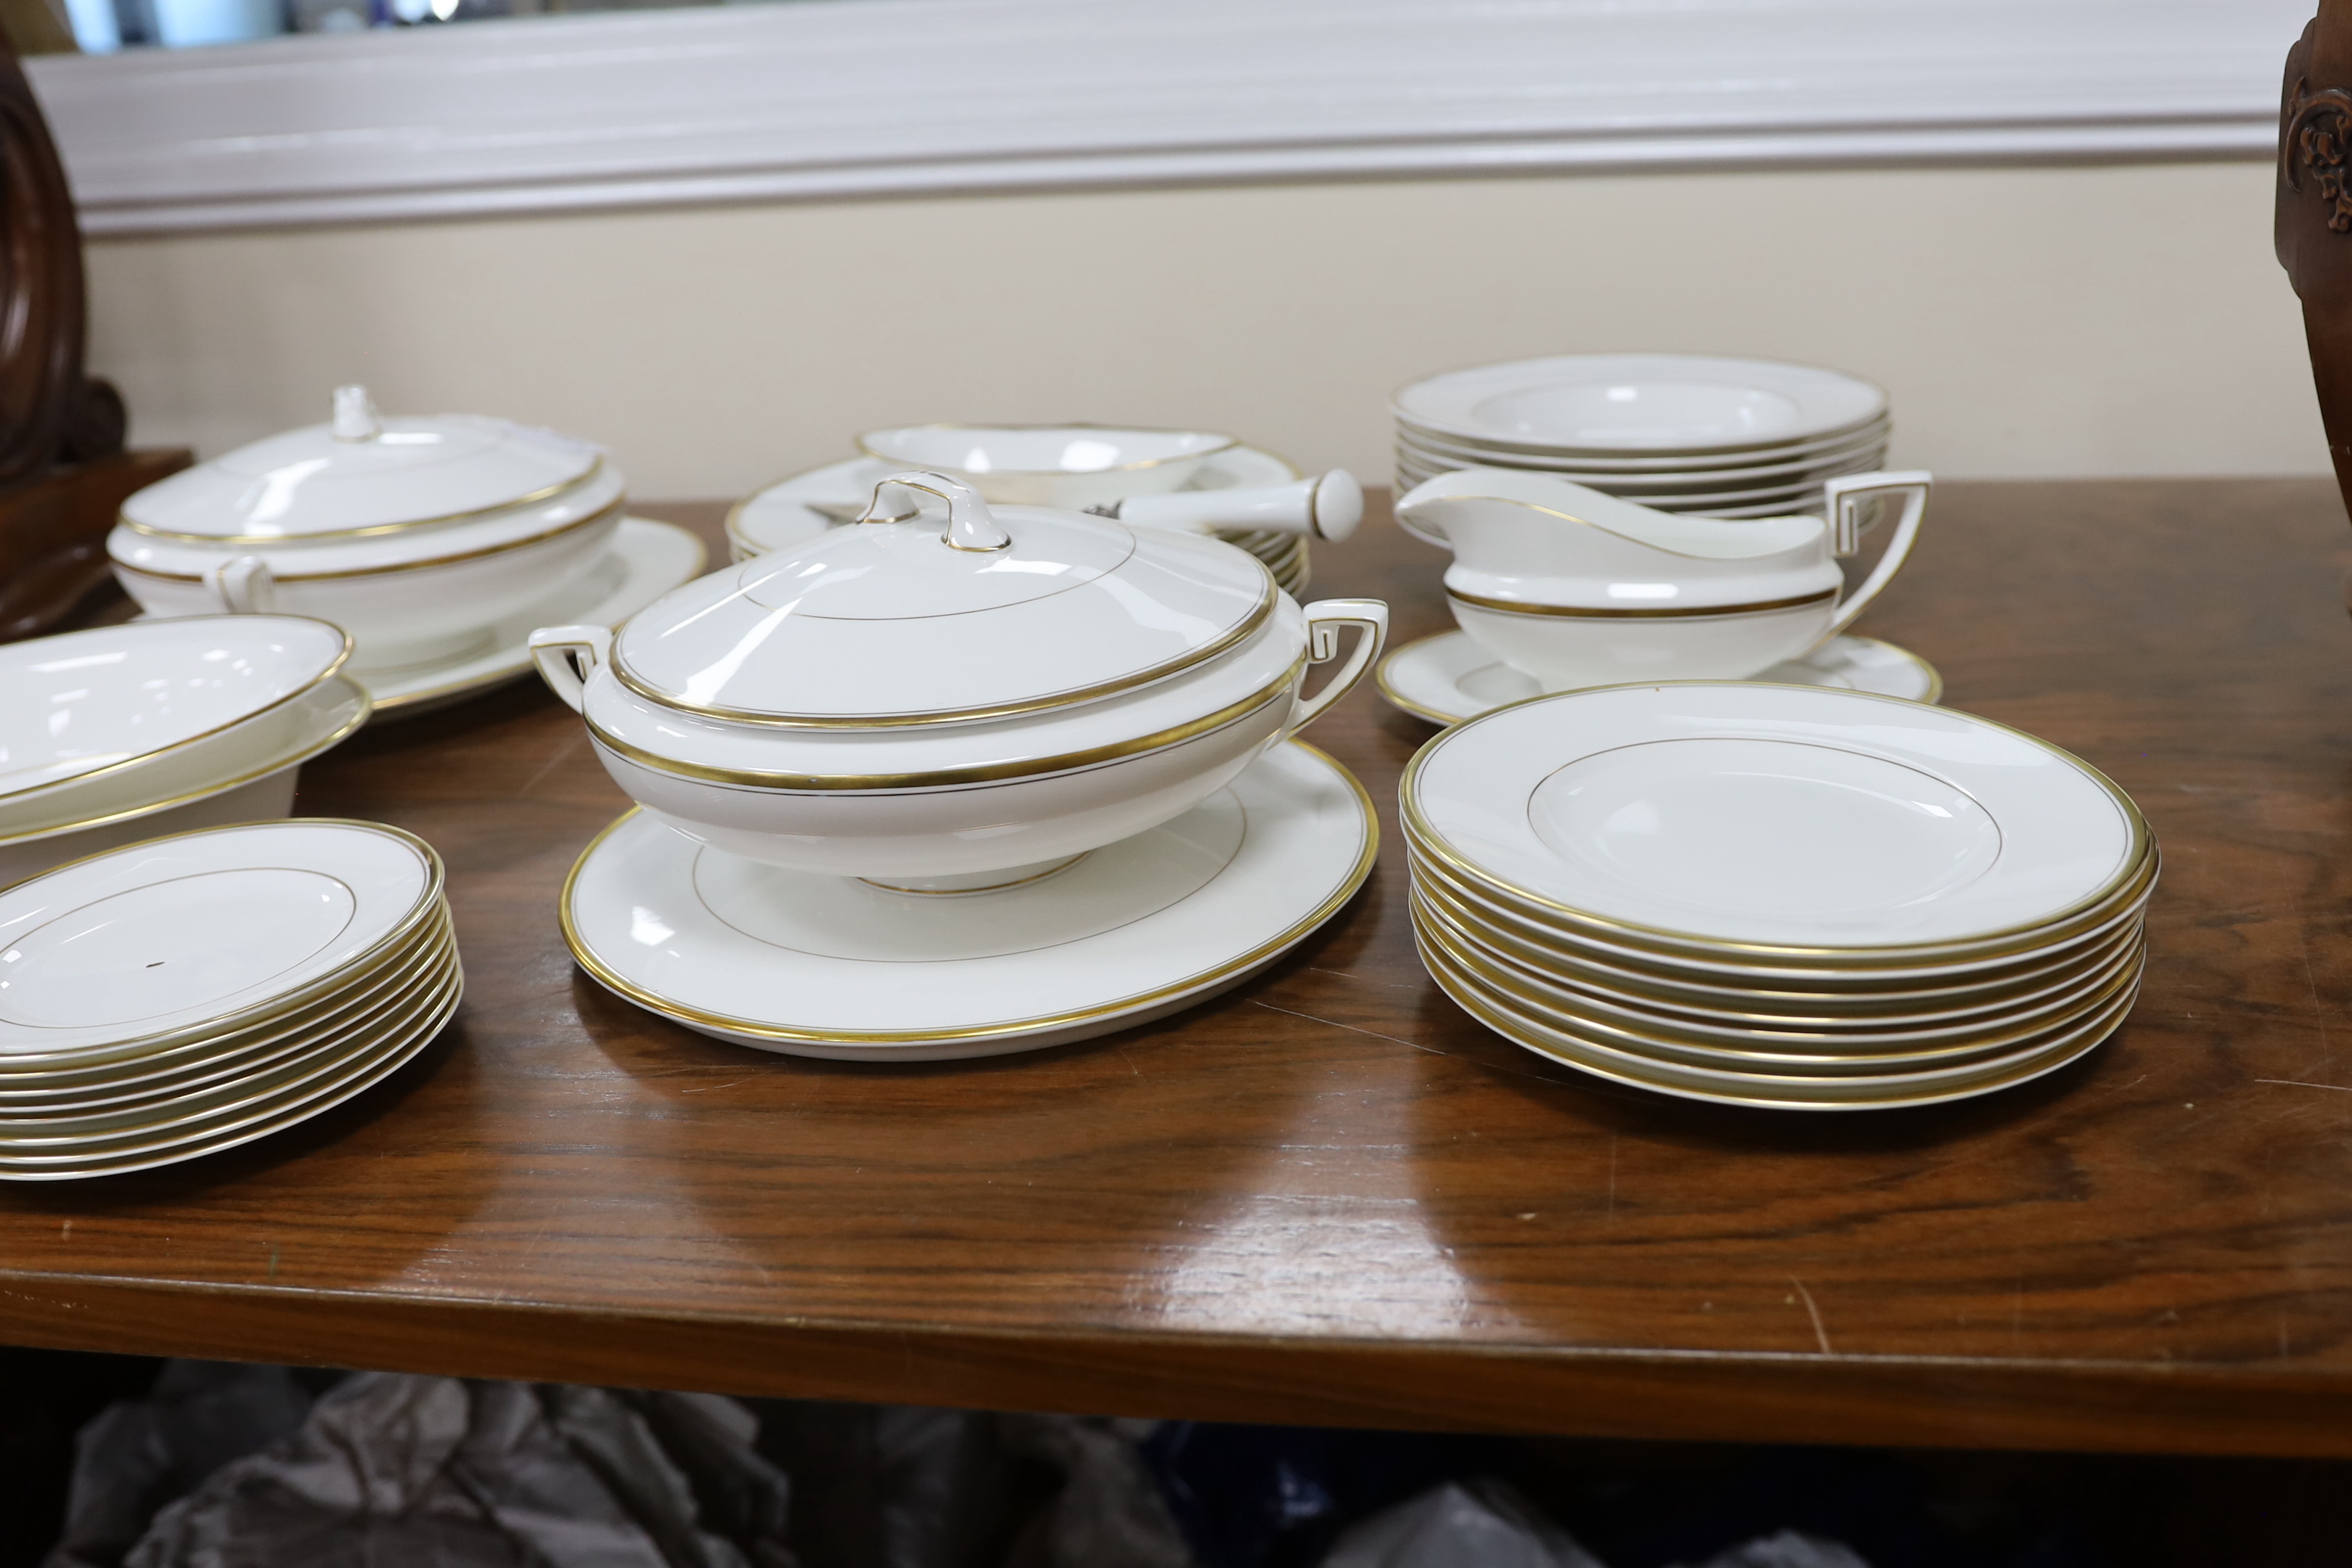 A Worcester ‘Viceroy’ part dinner service, including a bread/cake plate and a cake slice